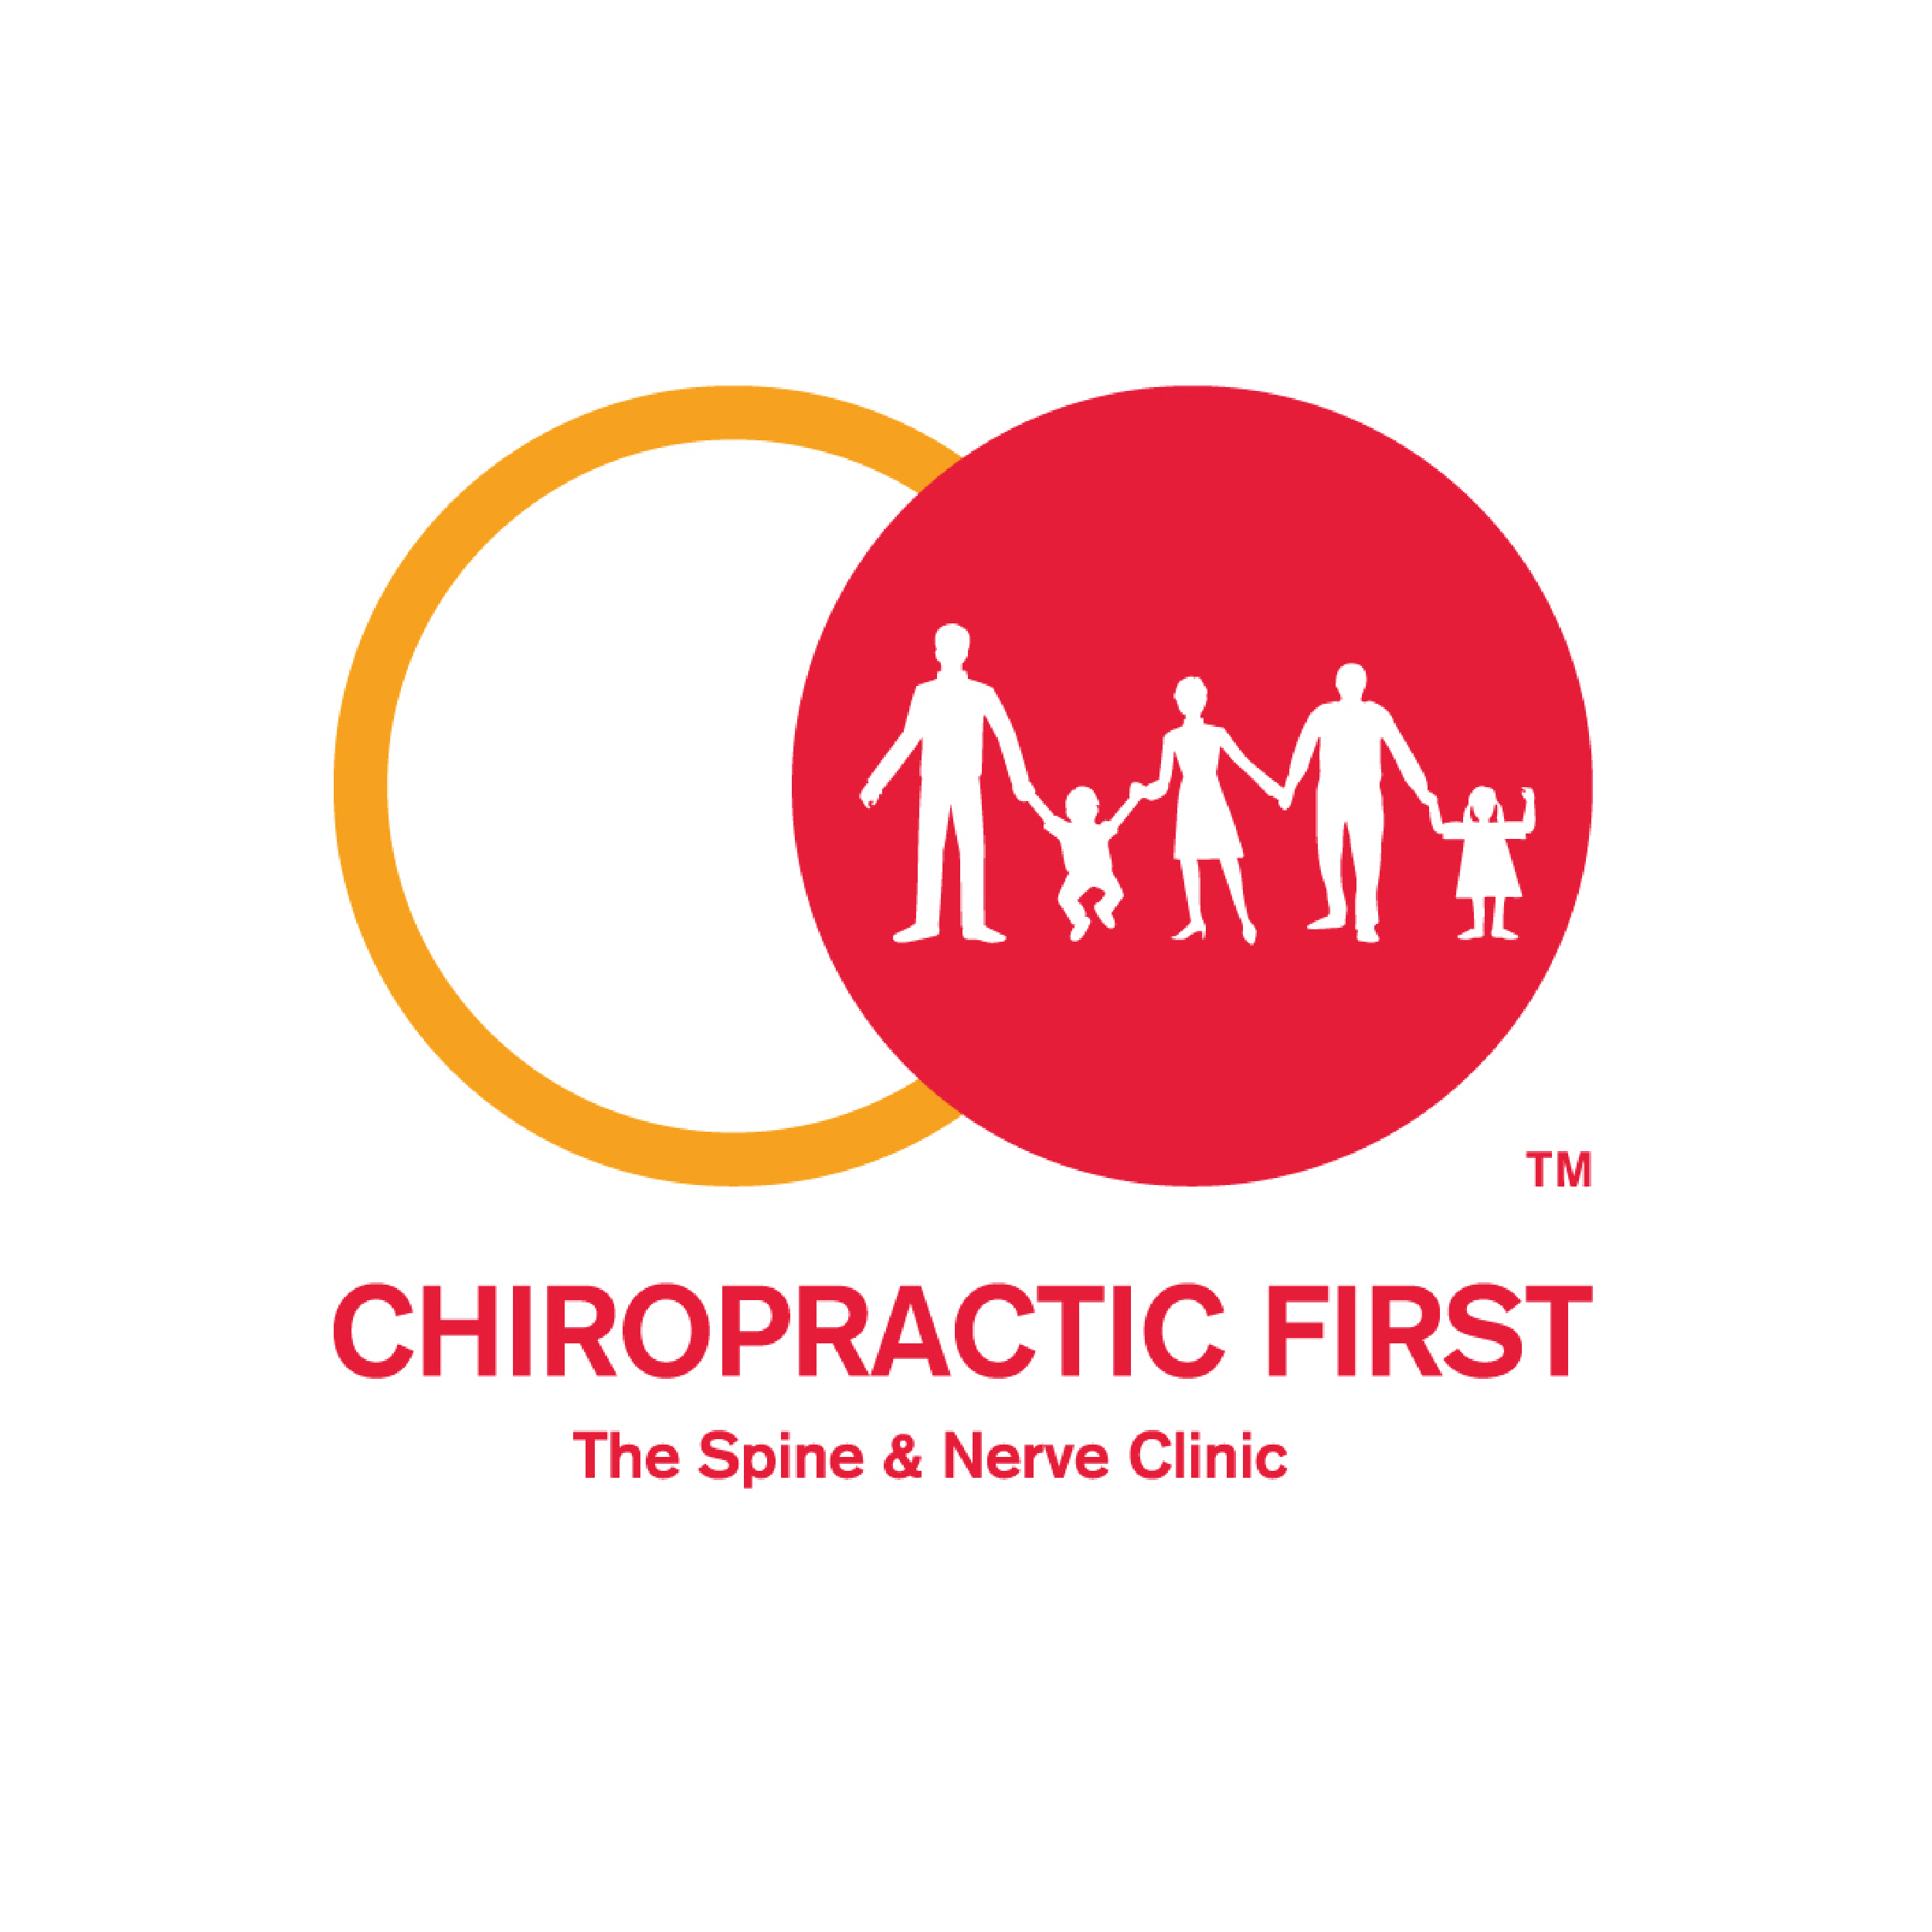 CHIROPRACTIC FIRST